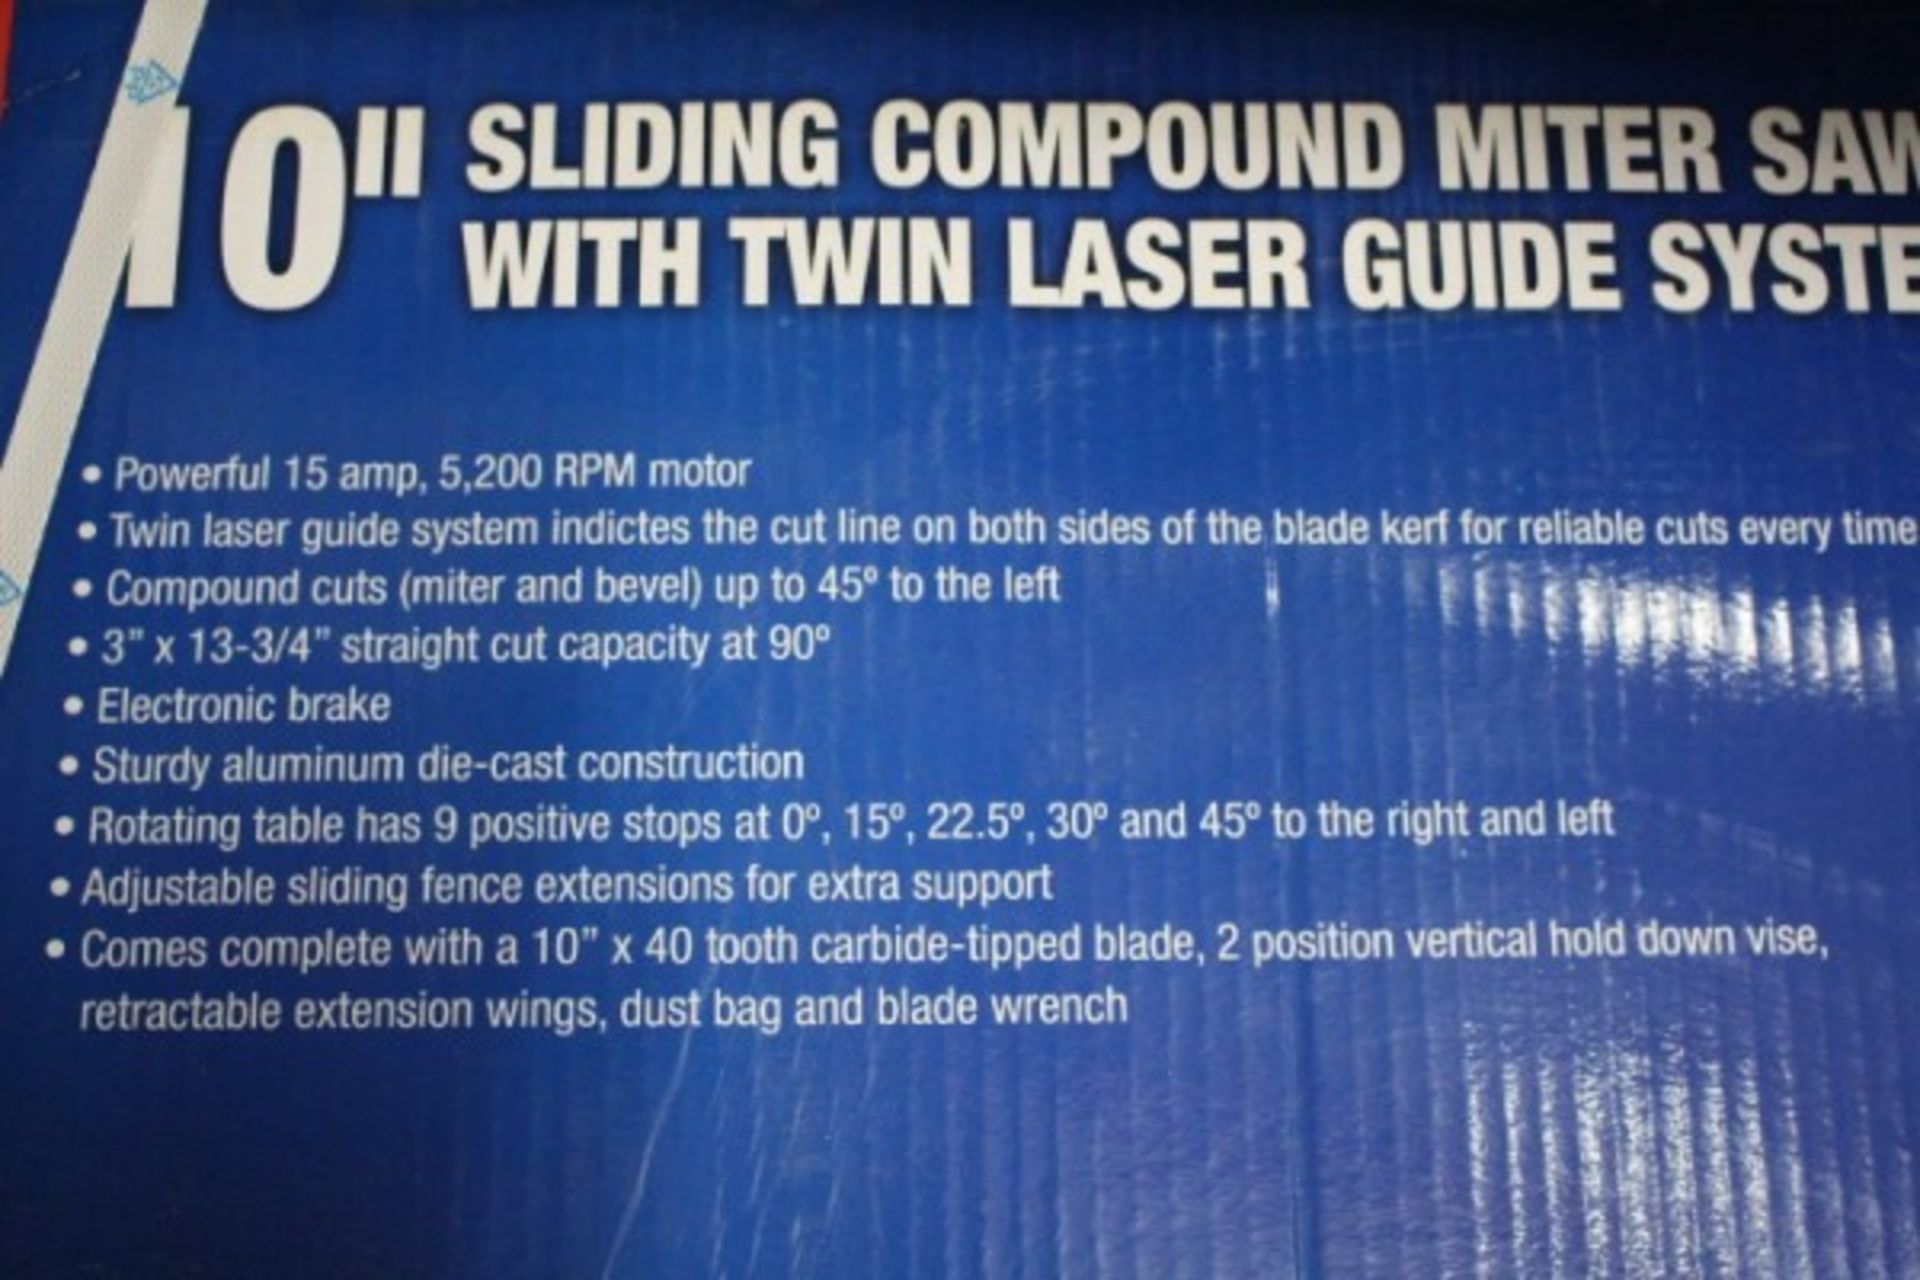 New King Canada 10" Sliding Compound Miter Saw with Twin Laser Guide - Image 2 of 3